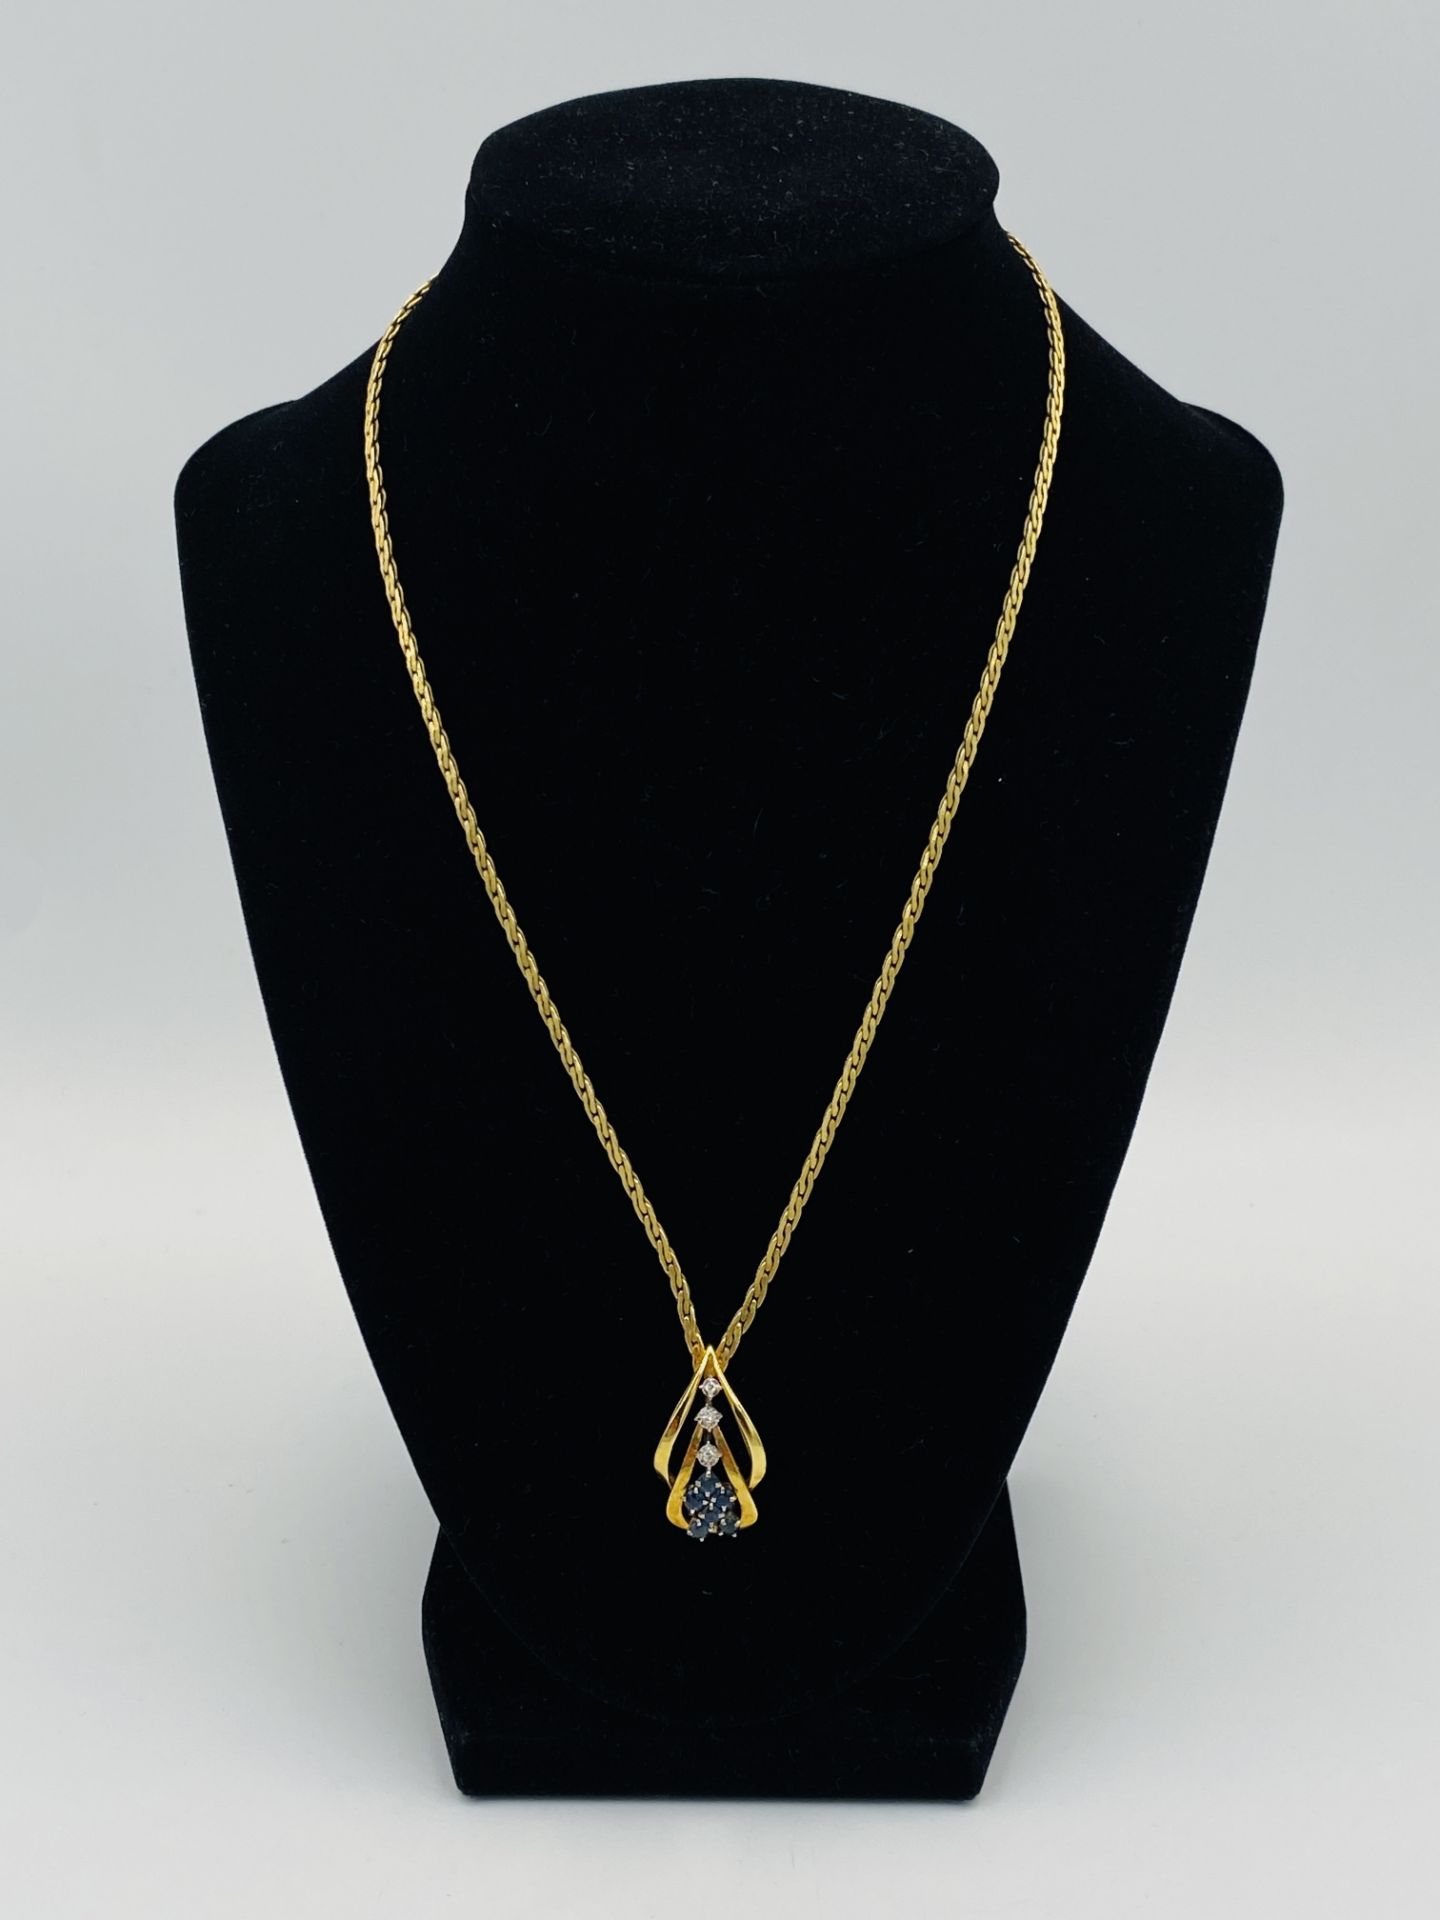 9ct gold, sapphire and diamond necklace - Image 5 of 6